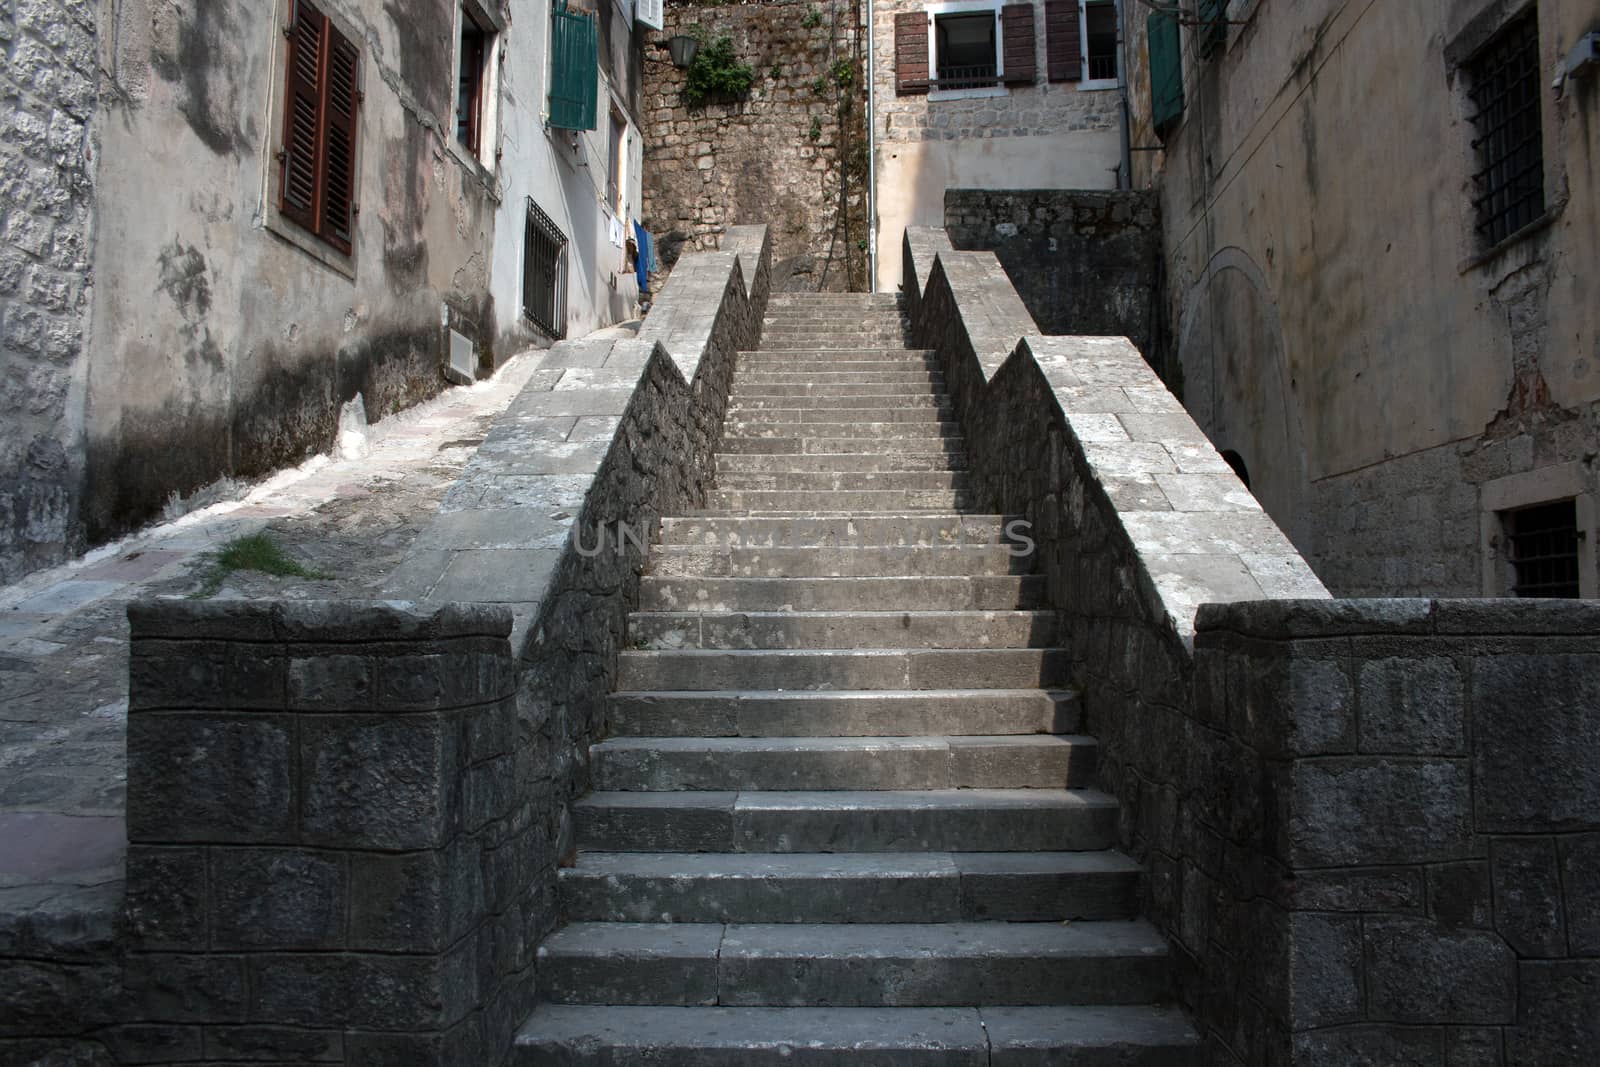 A general view of a stairin the city center of Kotor Montenegro